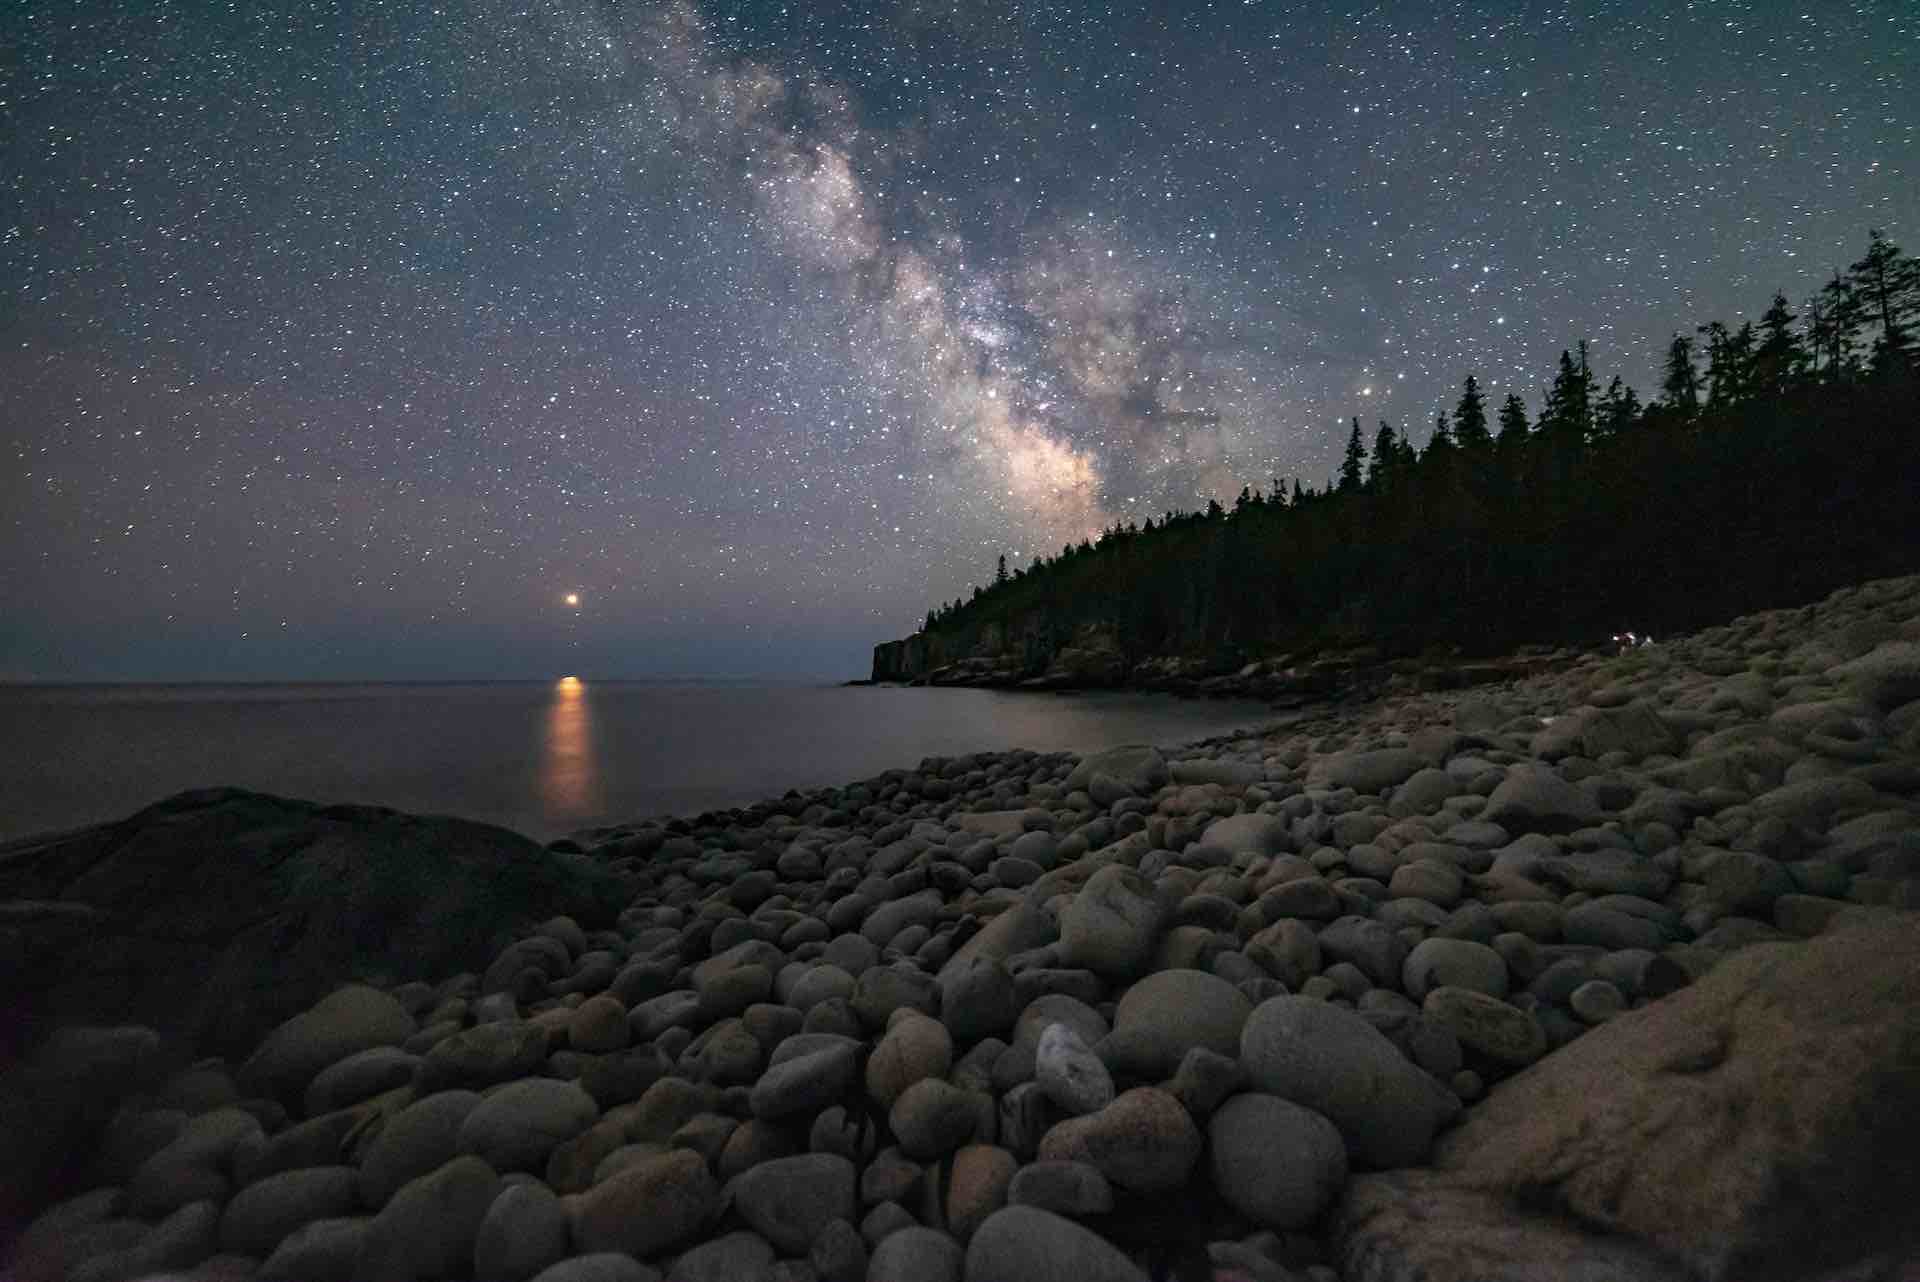 the nighttime view of Bar harbour in the Acadia National Park. Calm water with a silhouette of pine trees along shore. In the sky are twinkling stars, the moon is hidden behind the tree line but still lights the sky. In the distance over the water is a lone lit lighthouse. The sky is completely clear and the view to the horizon seems endless.